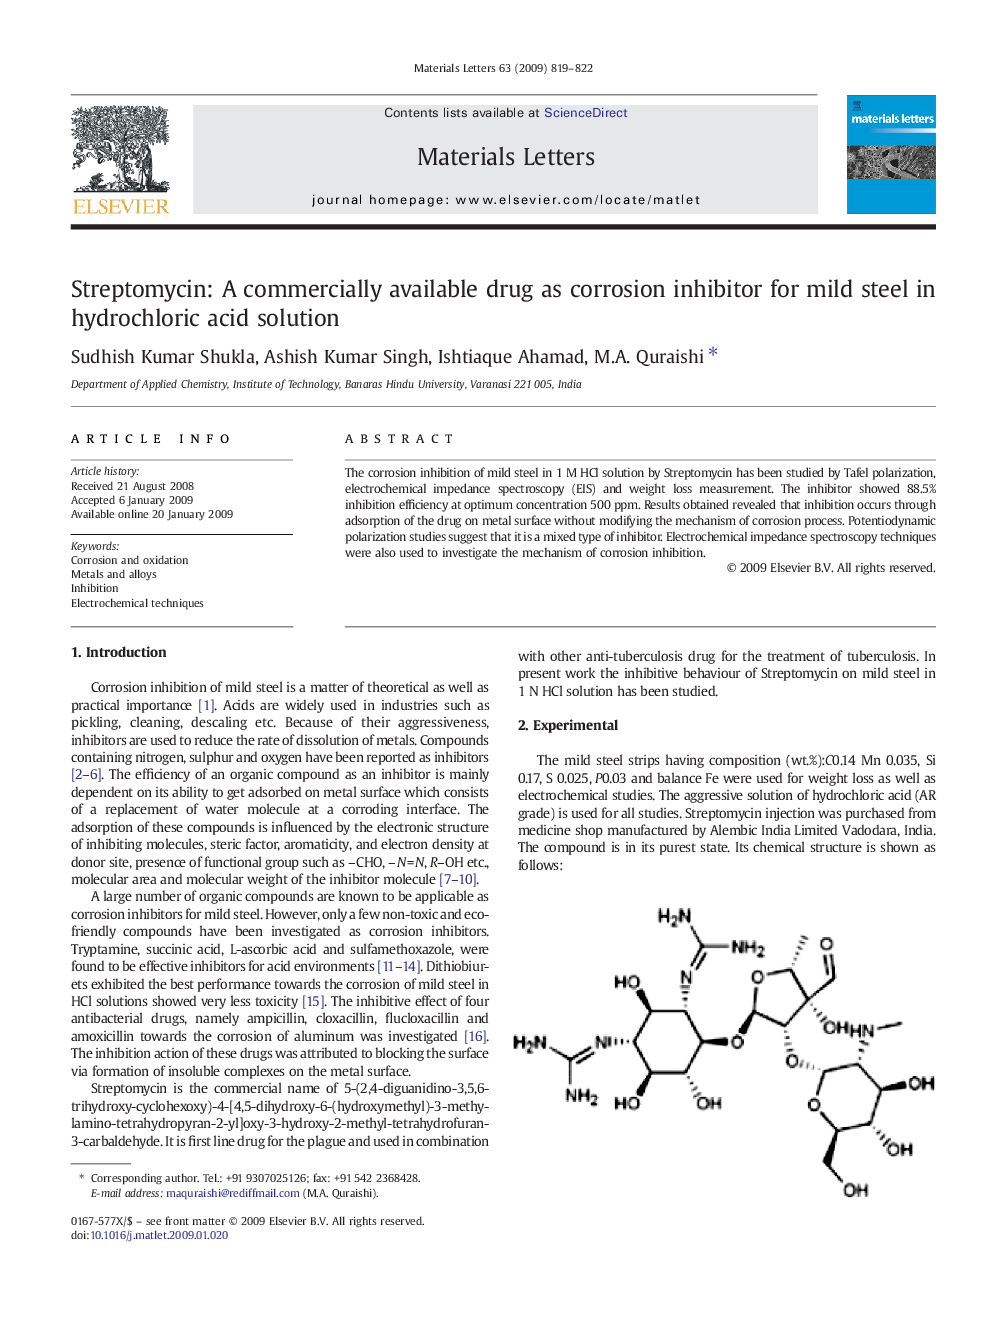 Streptomycin: A commercially available drug as corrosion inhibitor for mild steel in hydrochloric acid solution